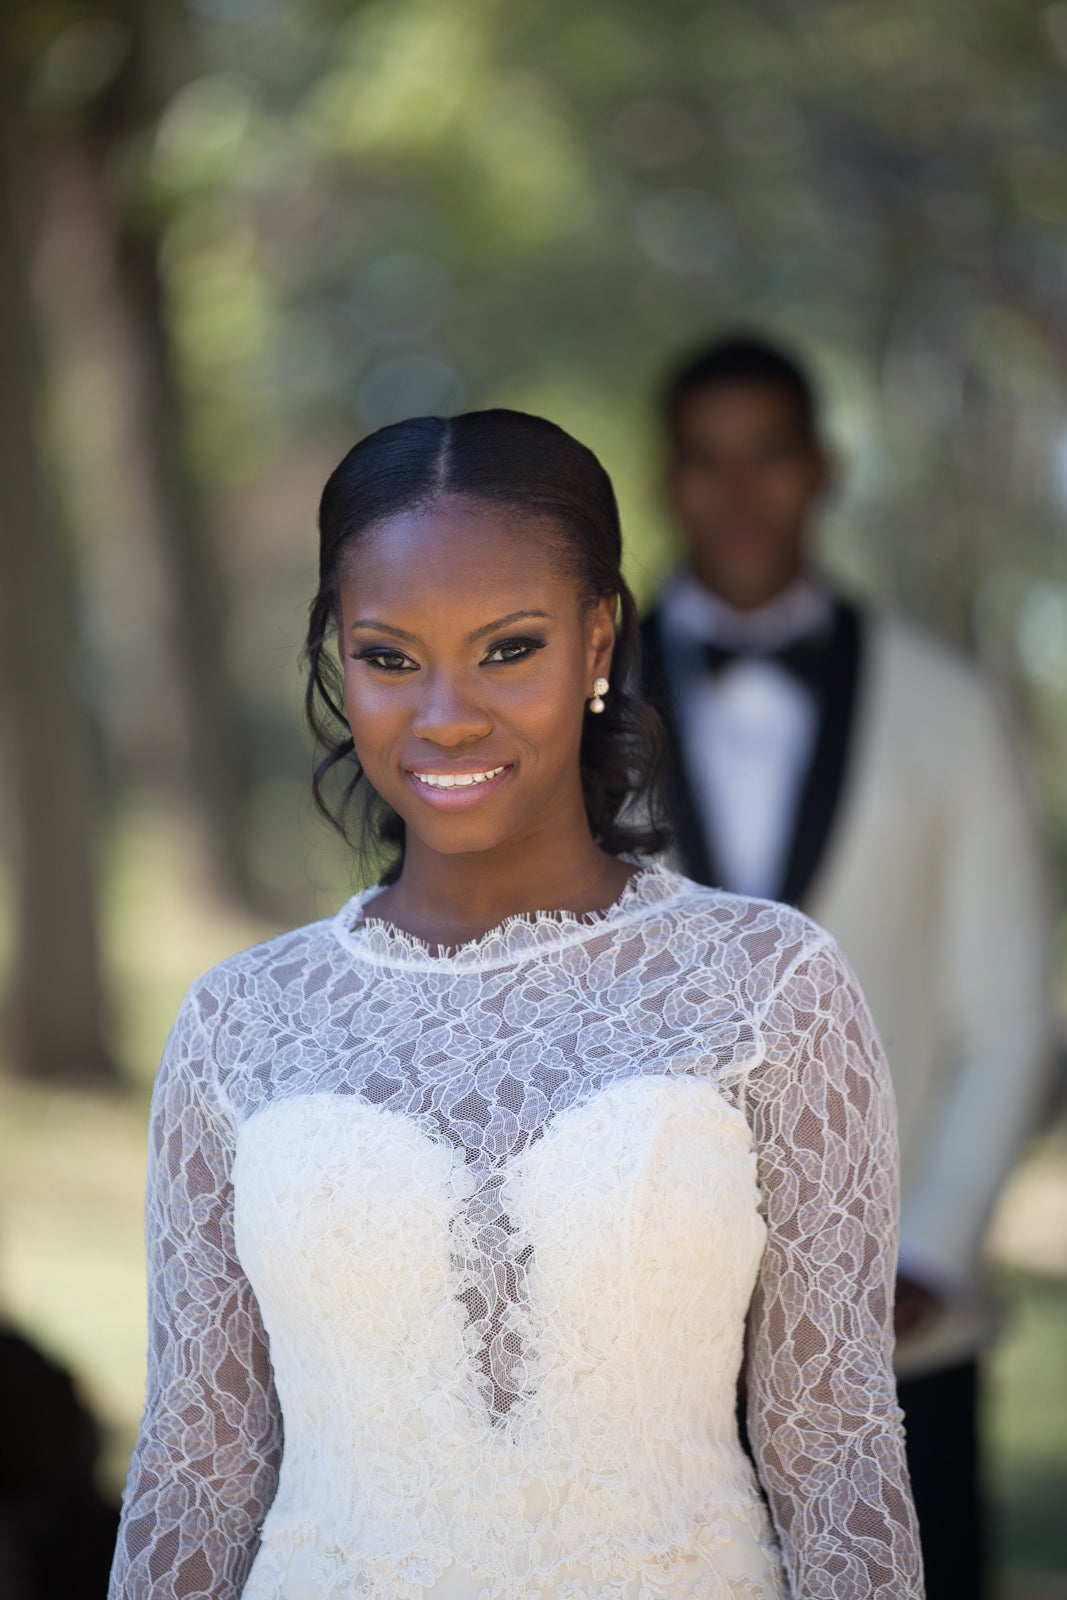 Bridal Bliss: Carlin and Madison's Modern Military Wedding Photos Will Steal Your Heart
